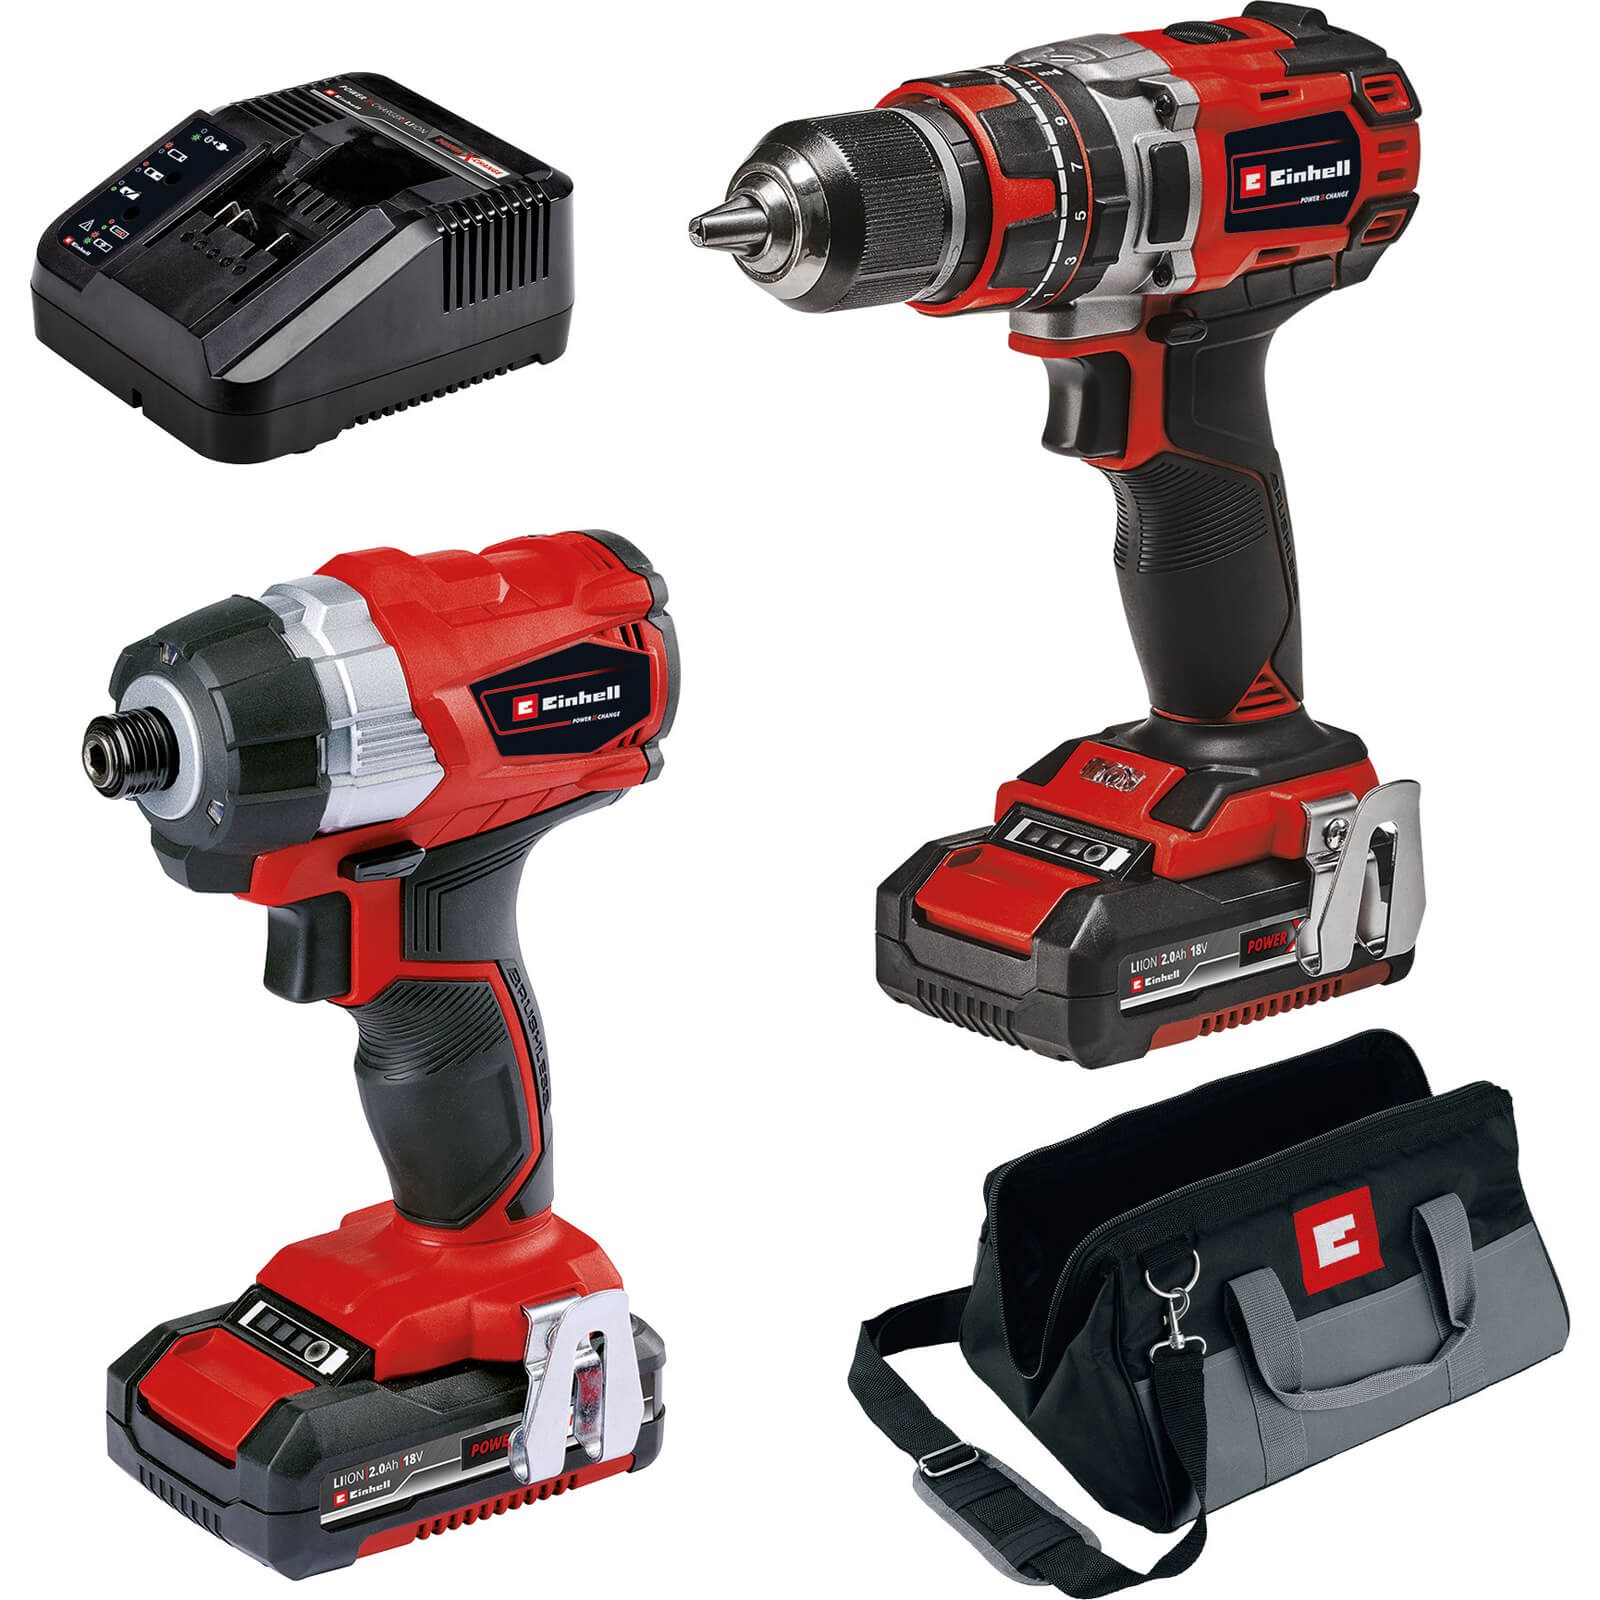 Einhell 18v Cordless Brushless Combi Drill and Impact Driver Kit